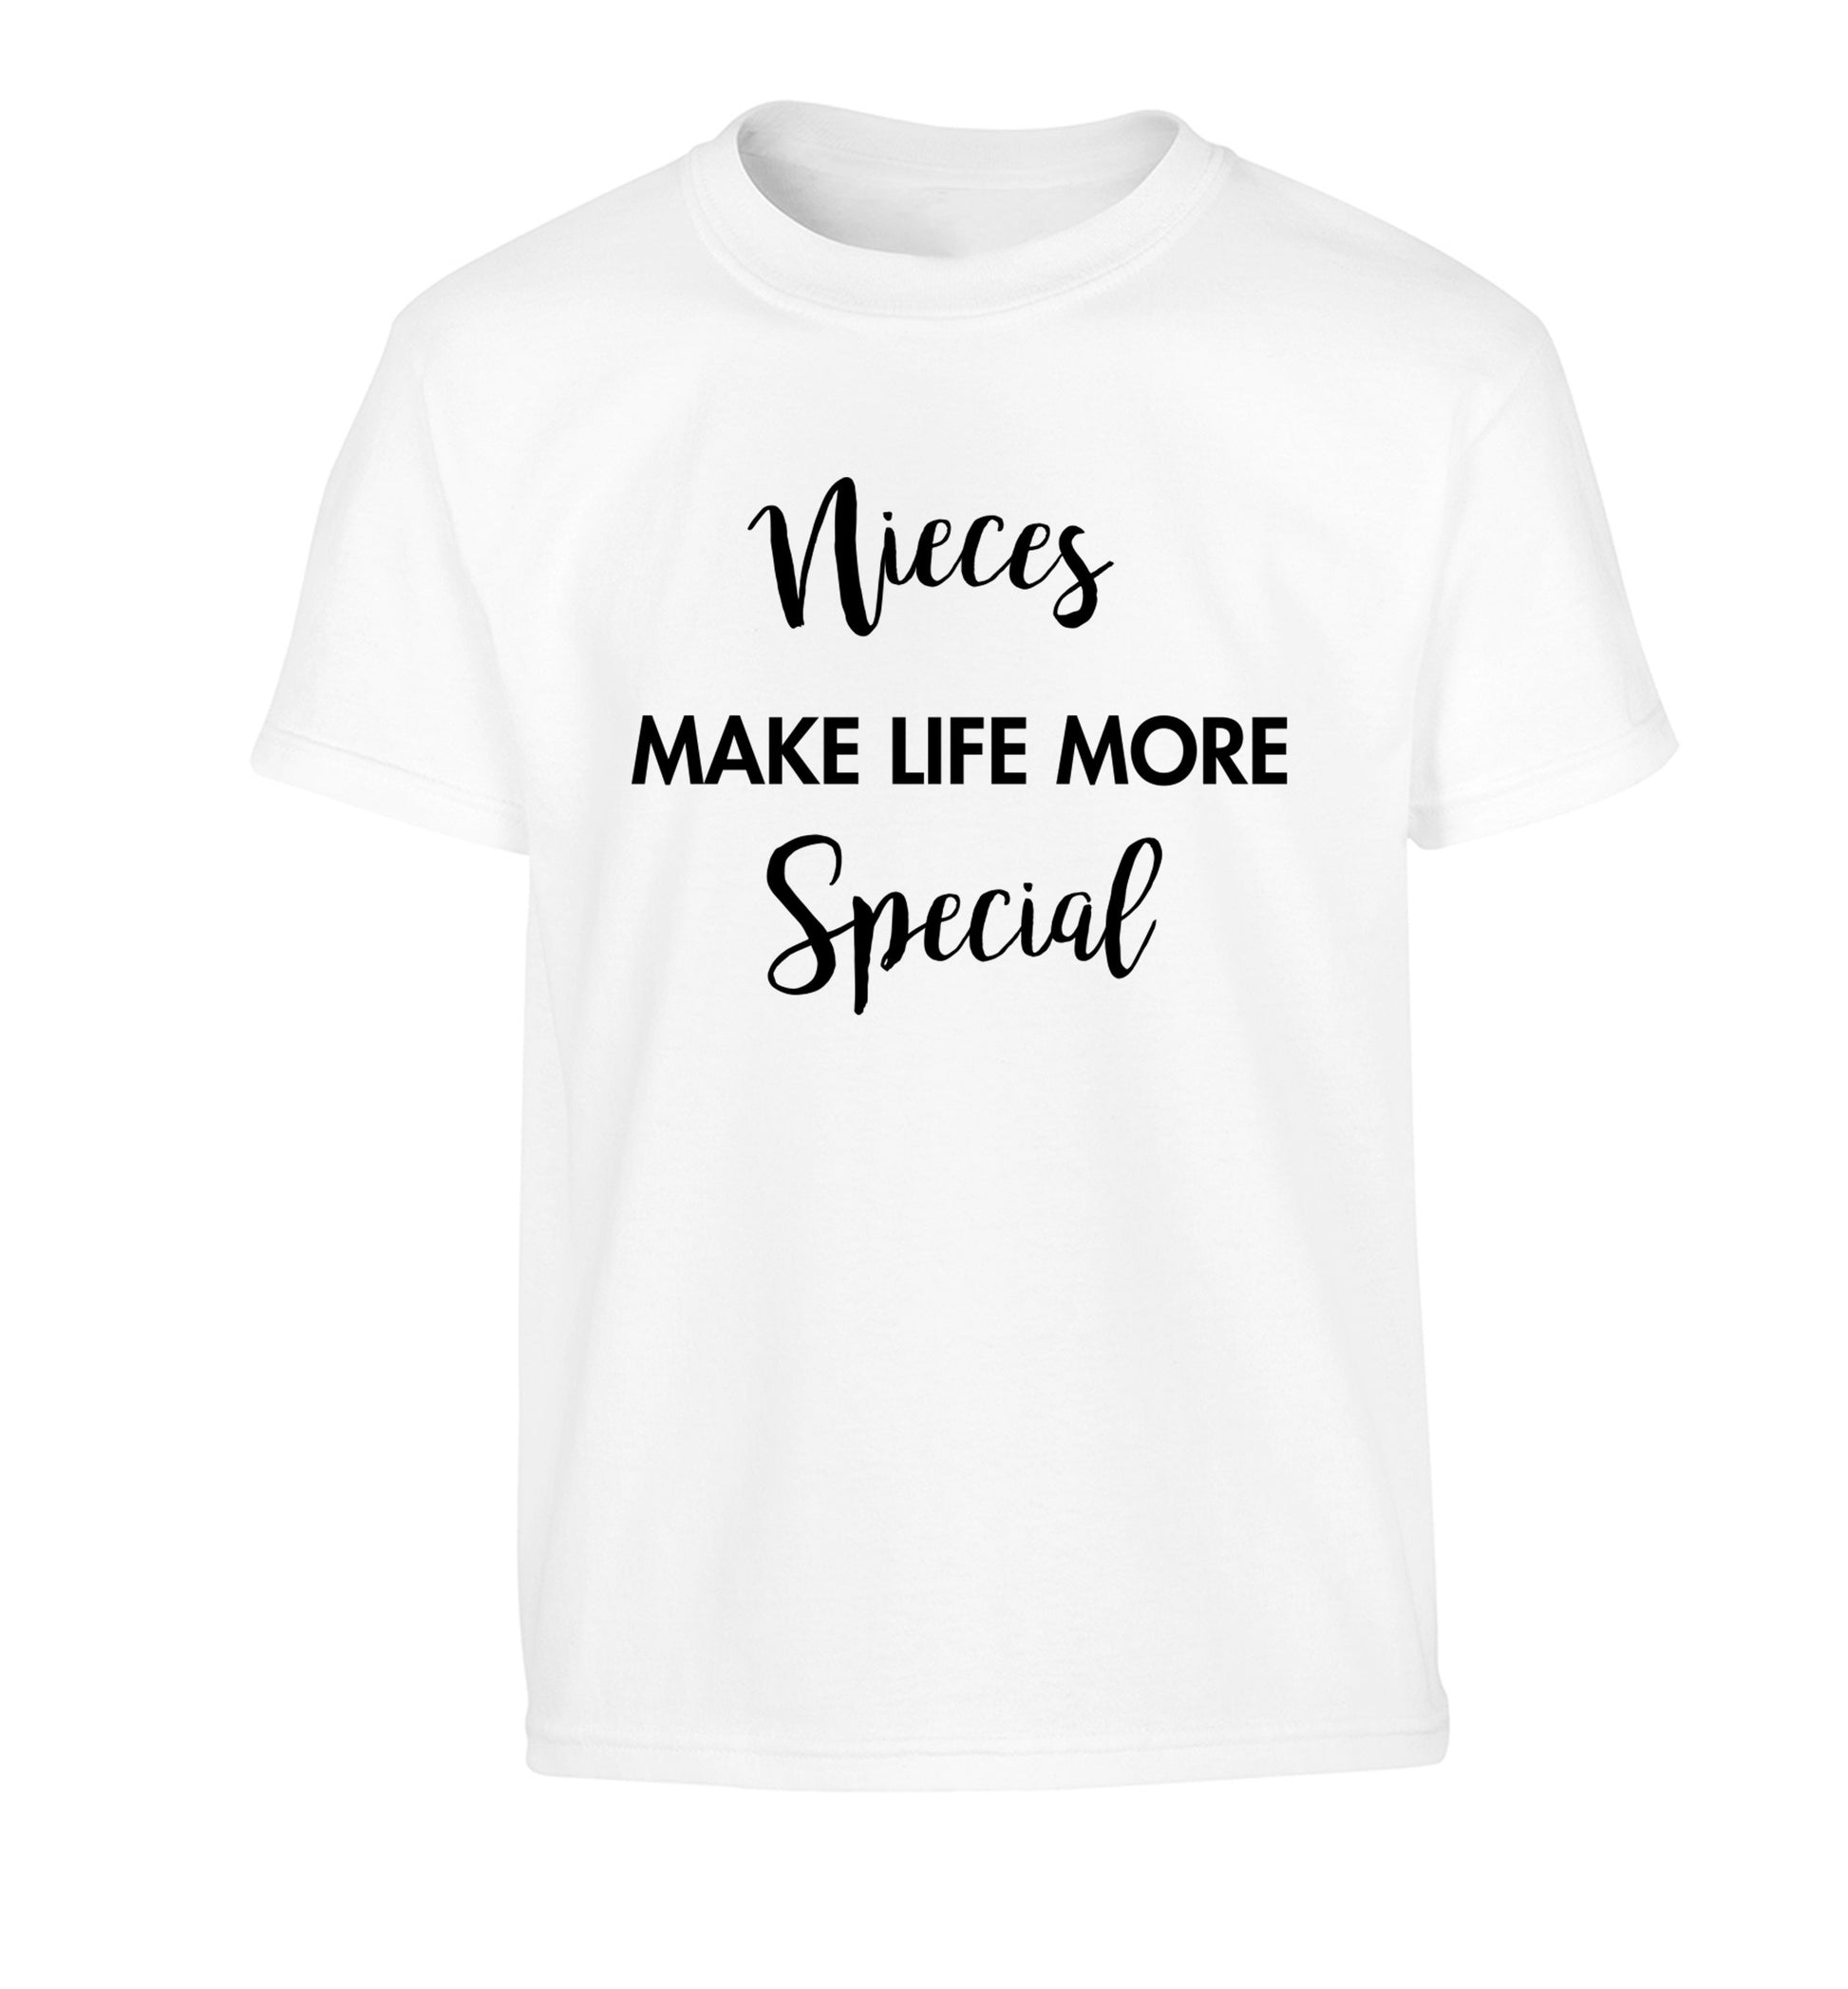 Nieces make life more special Children's white Tshirt 12-14 Years